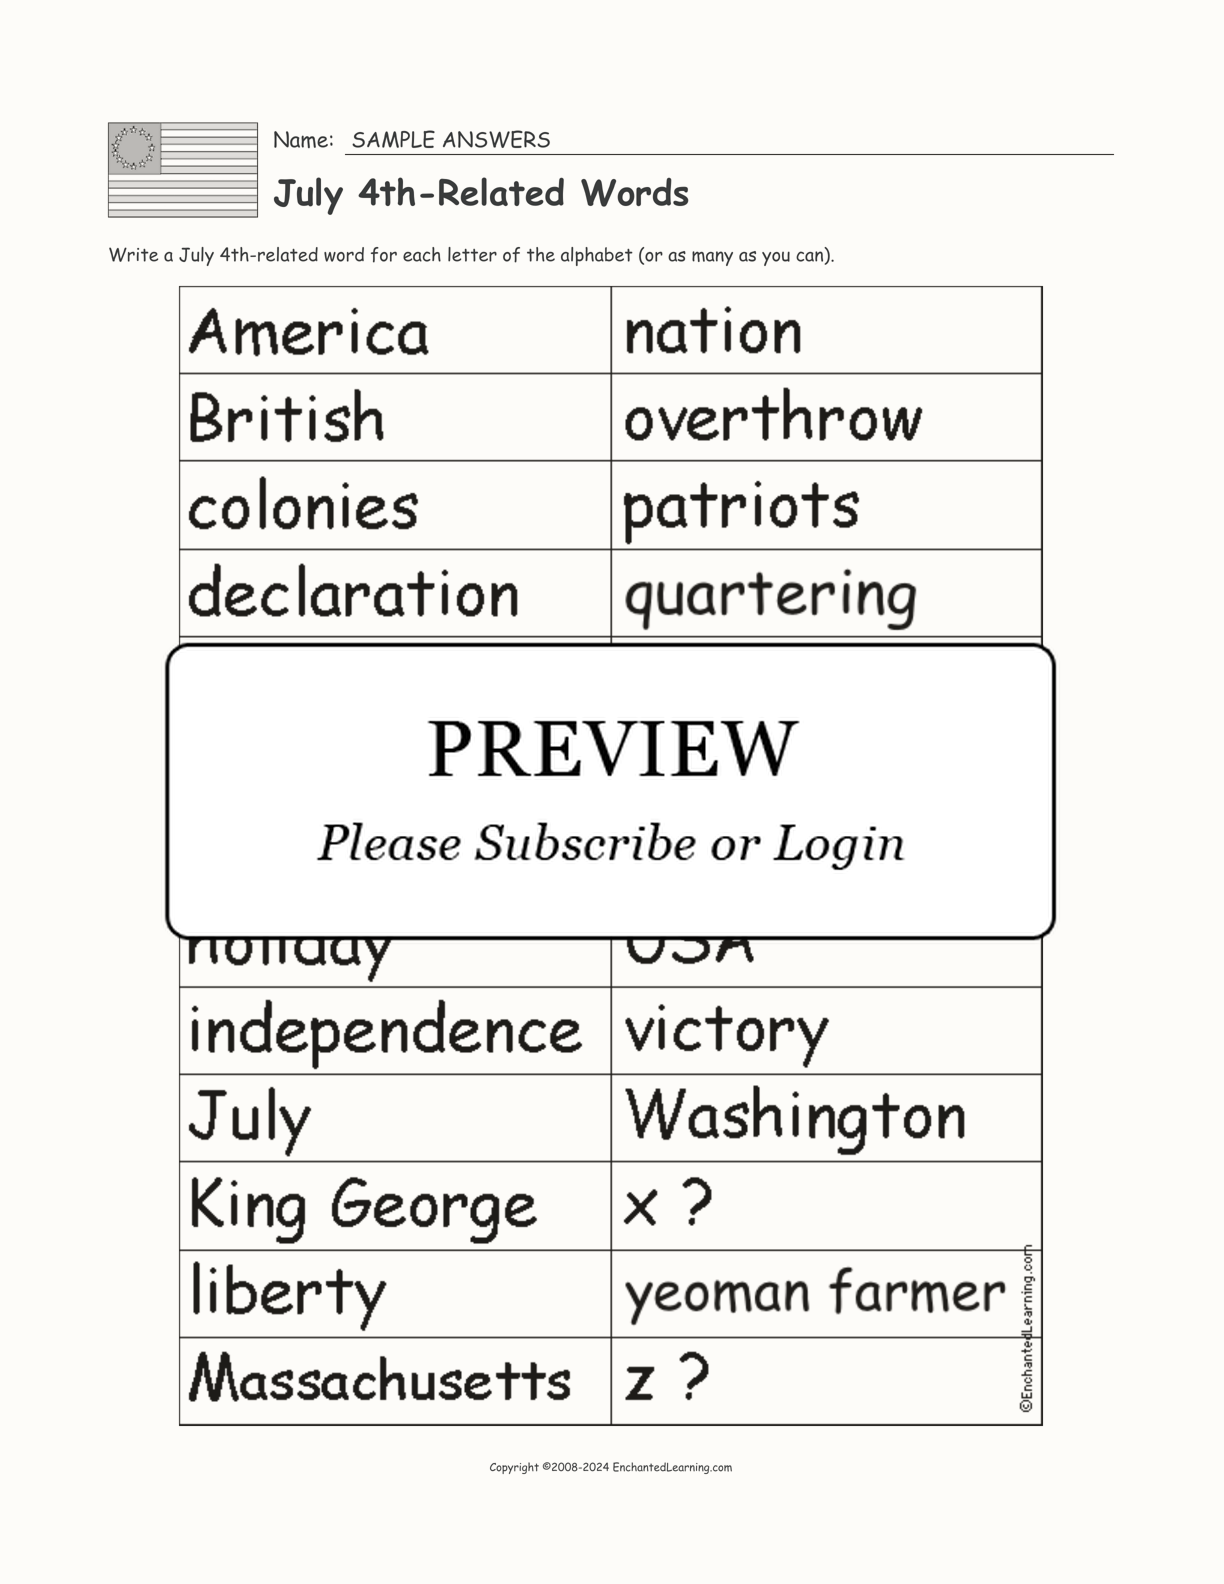 July 4th-Related Words interactive worksheet page 2